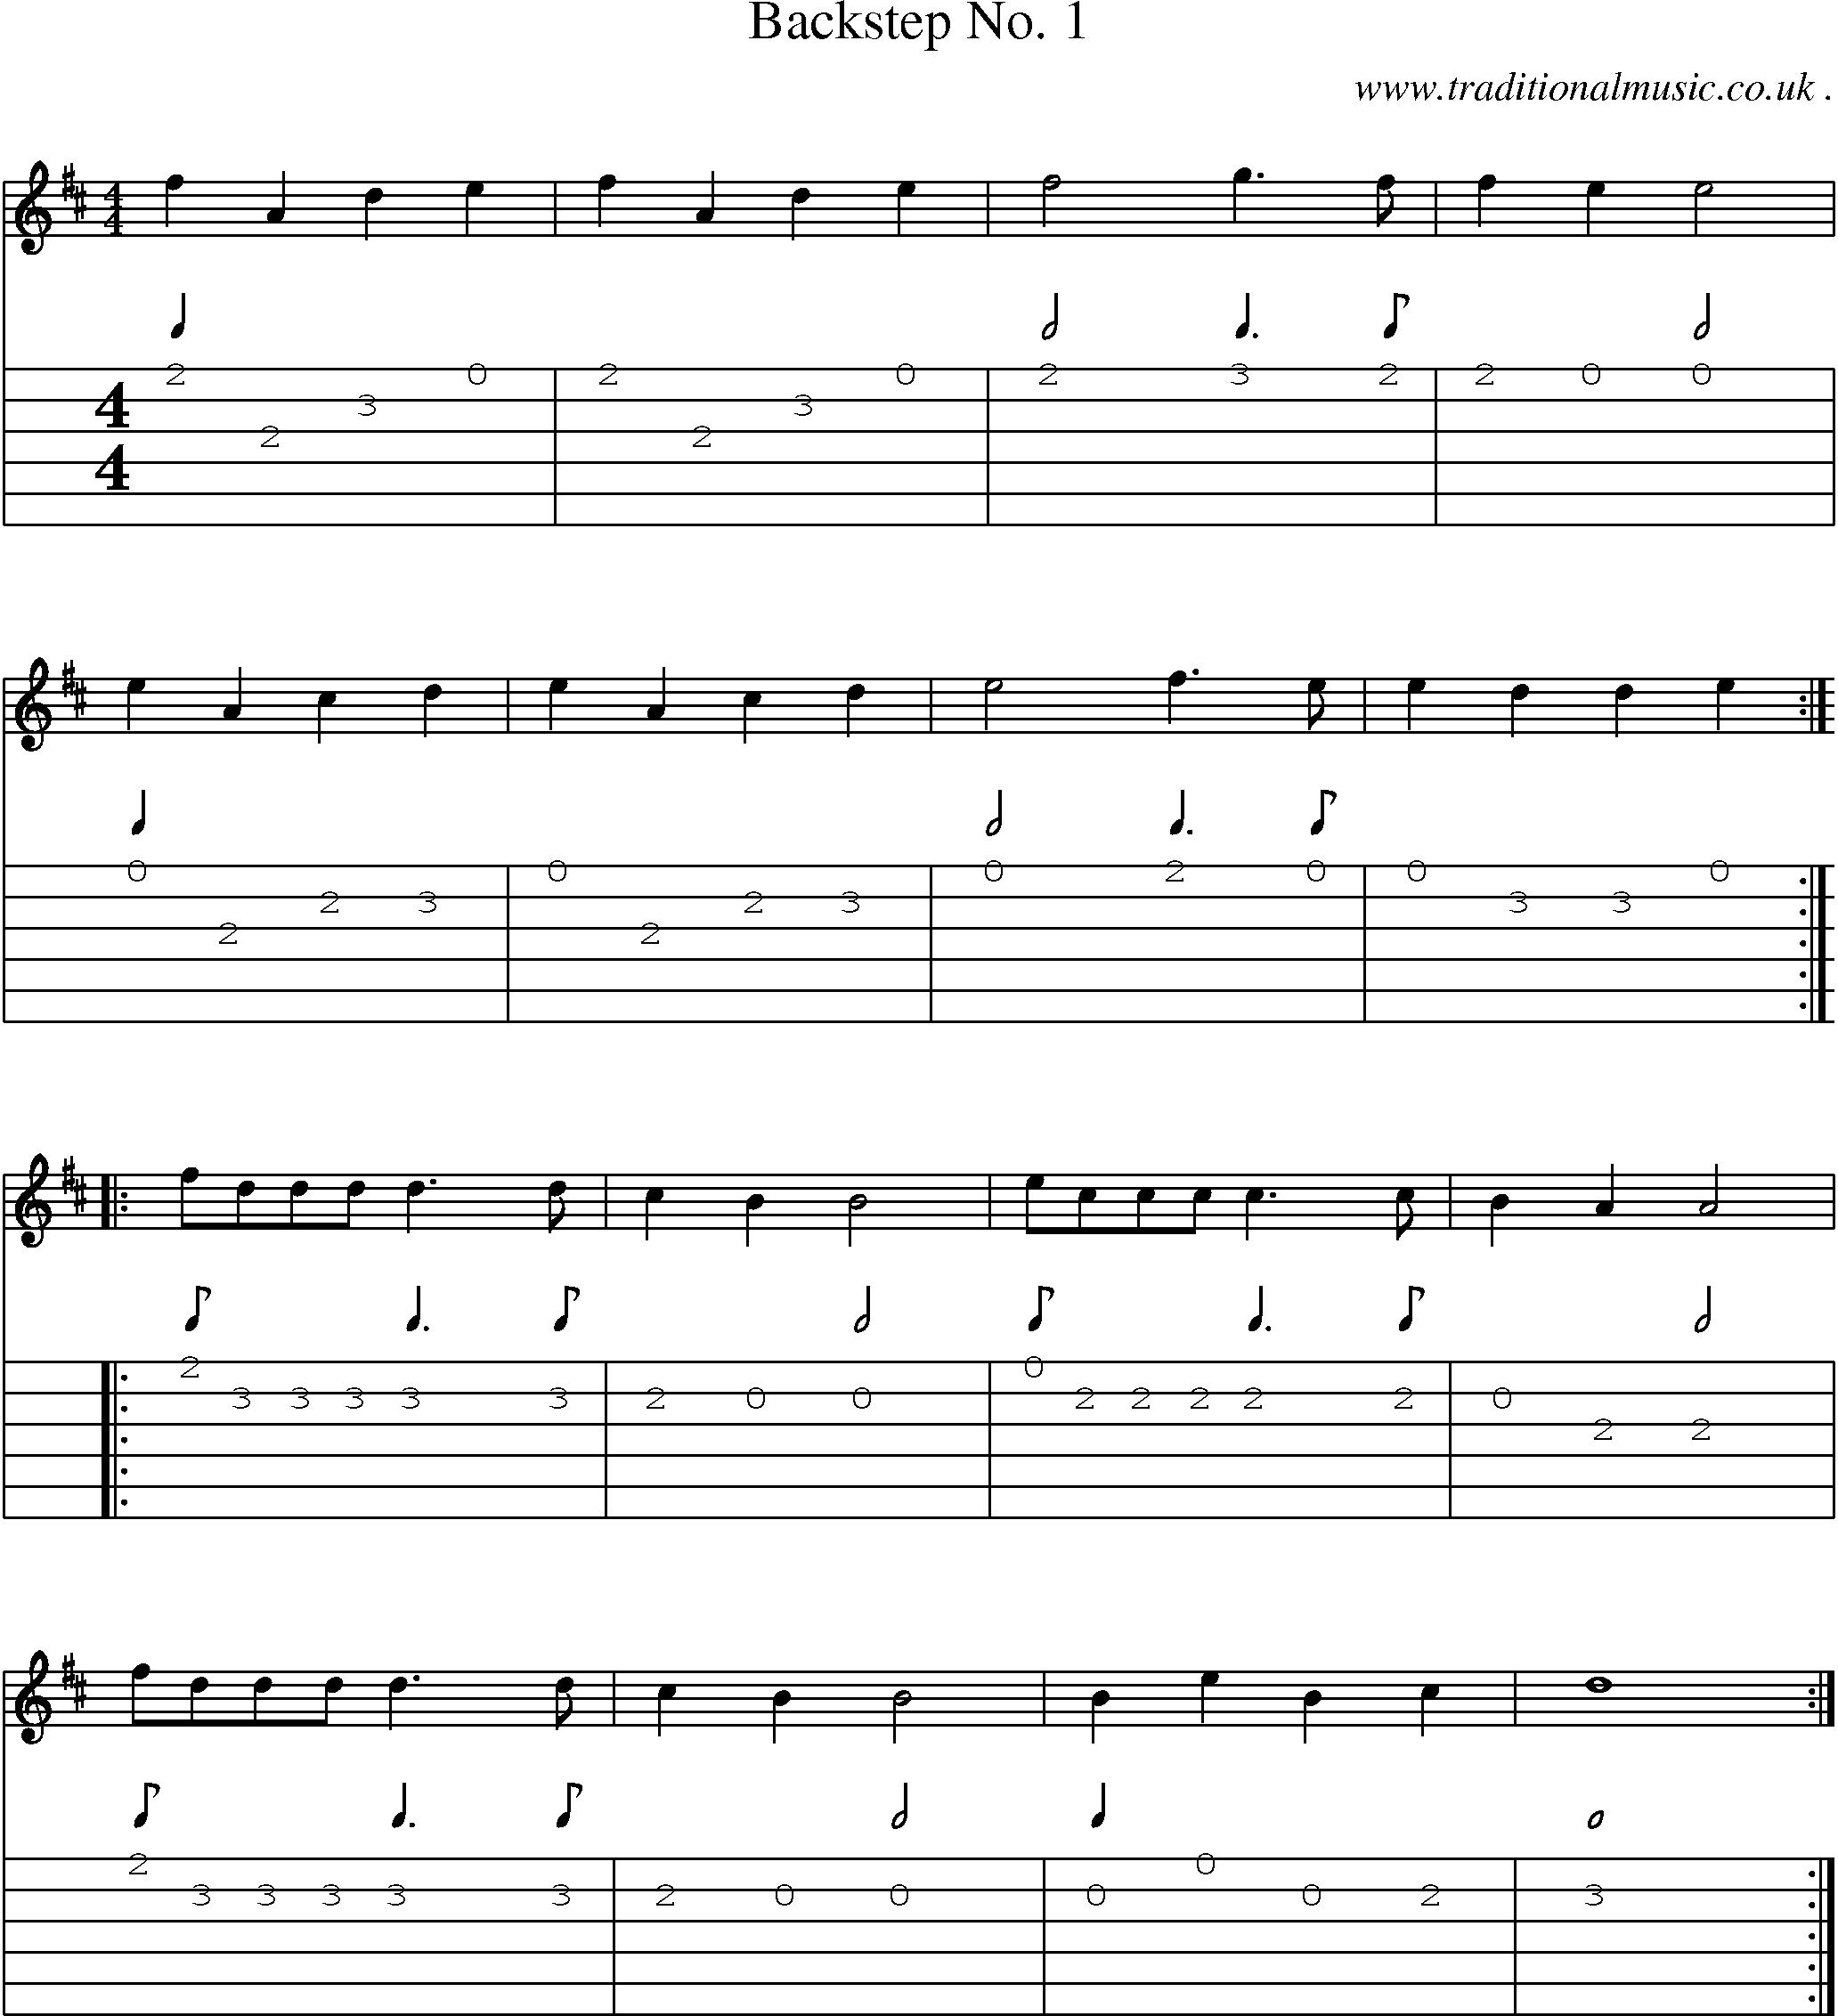 Sheet-Music and Guitar Tabs for Backstep No 1